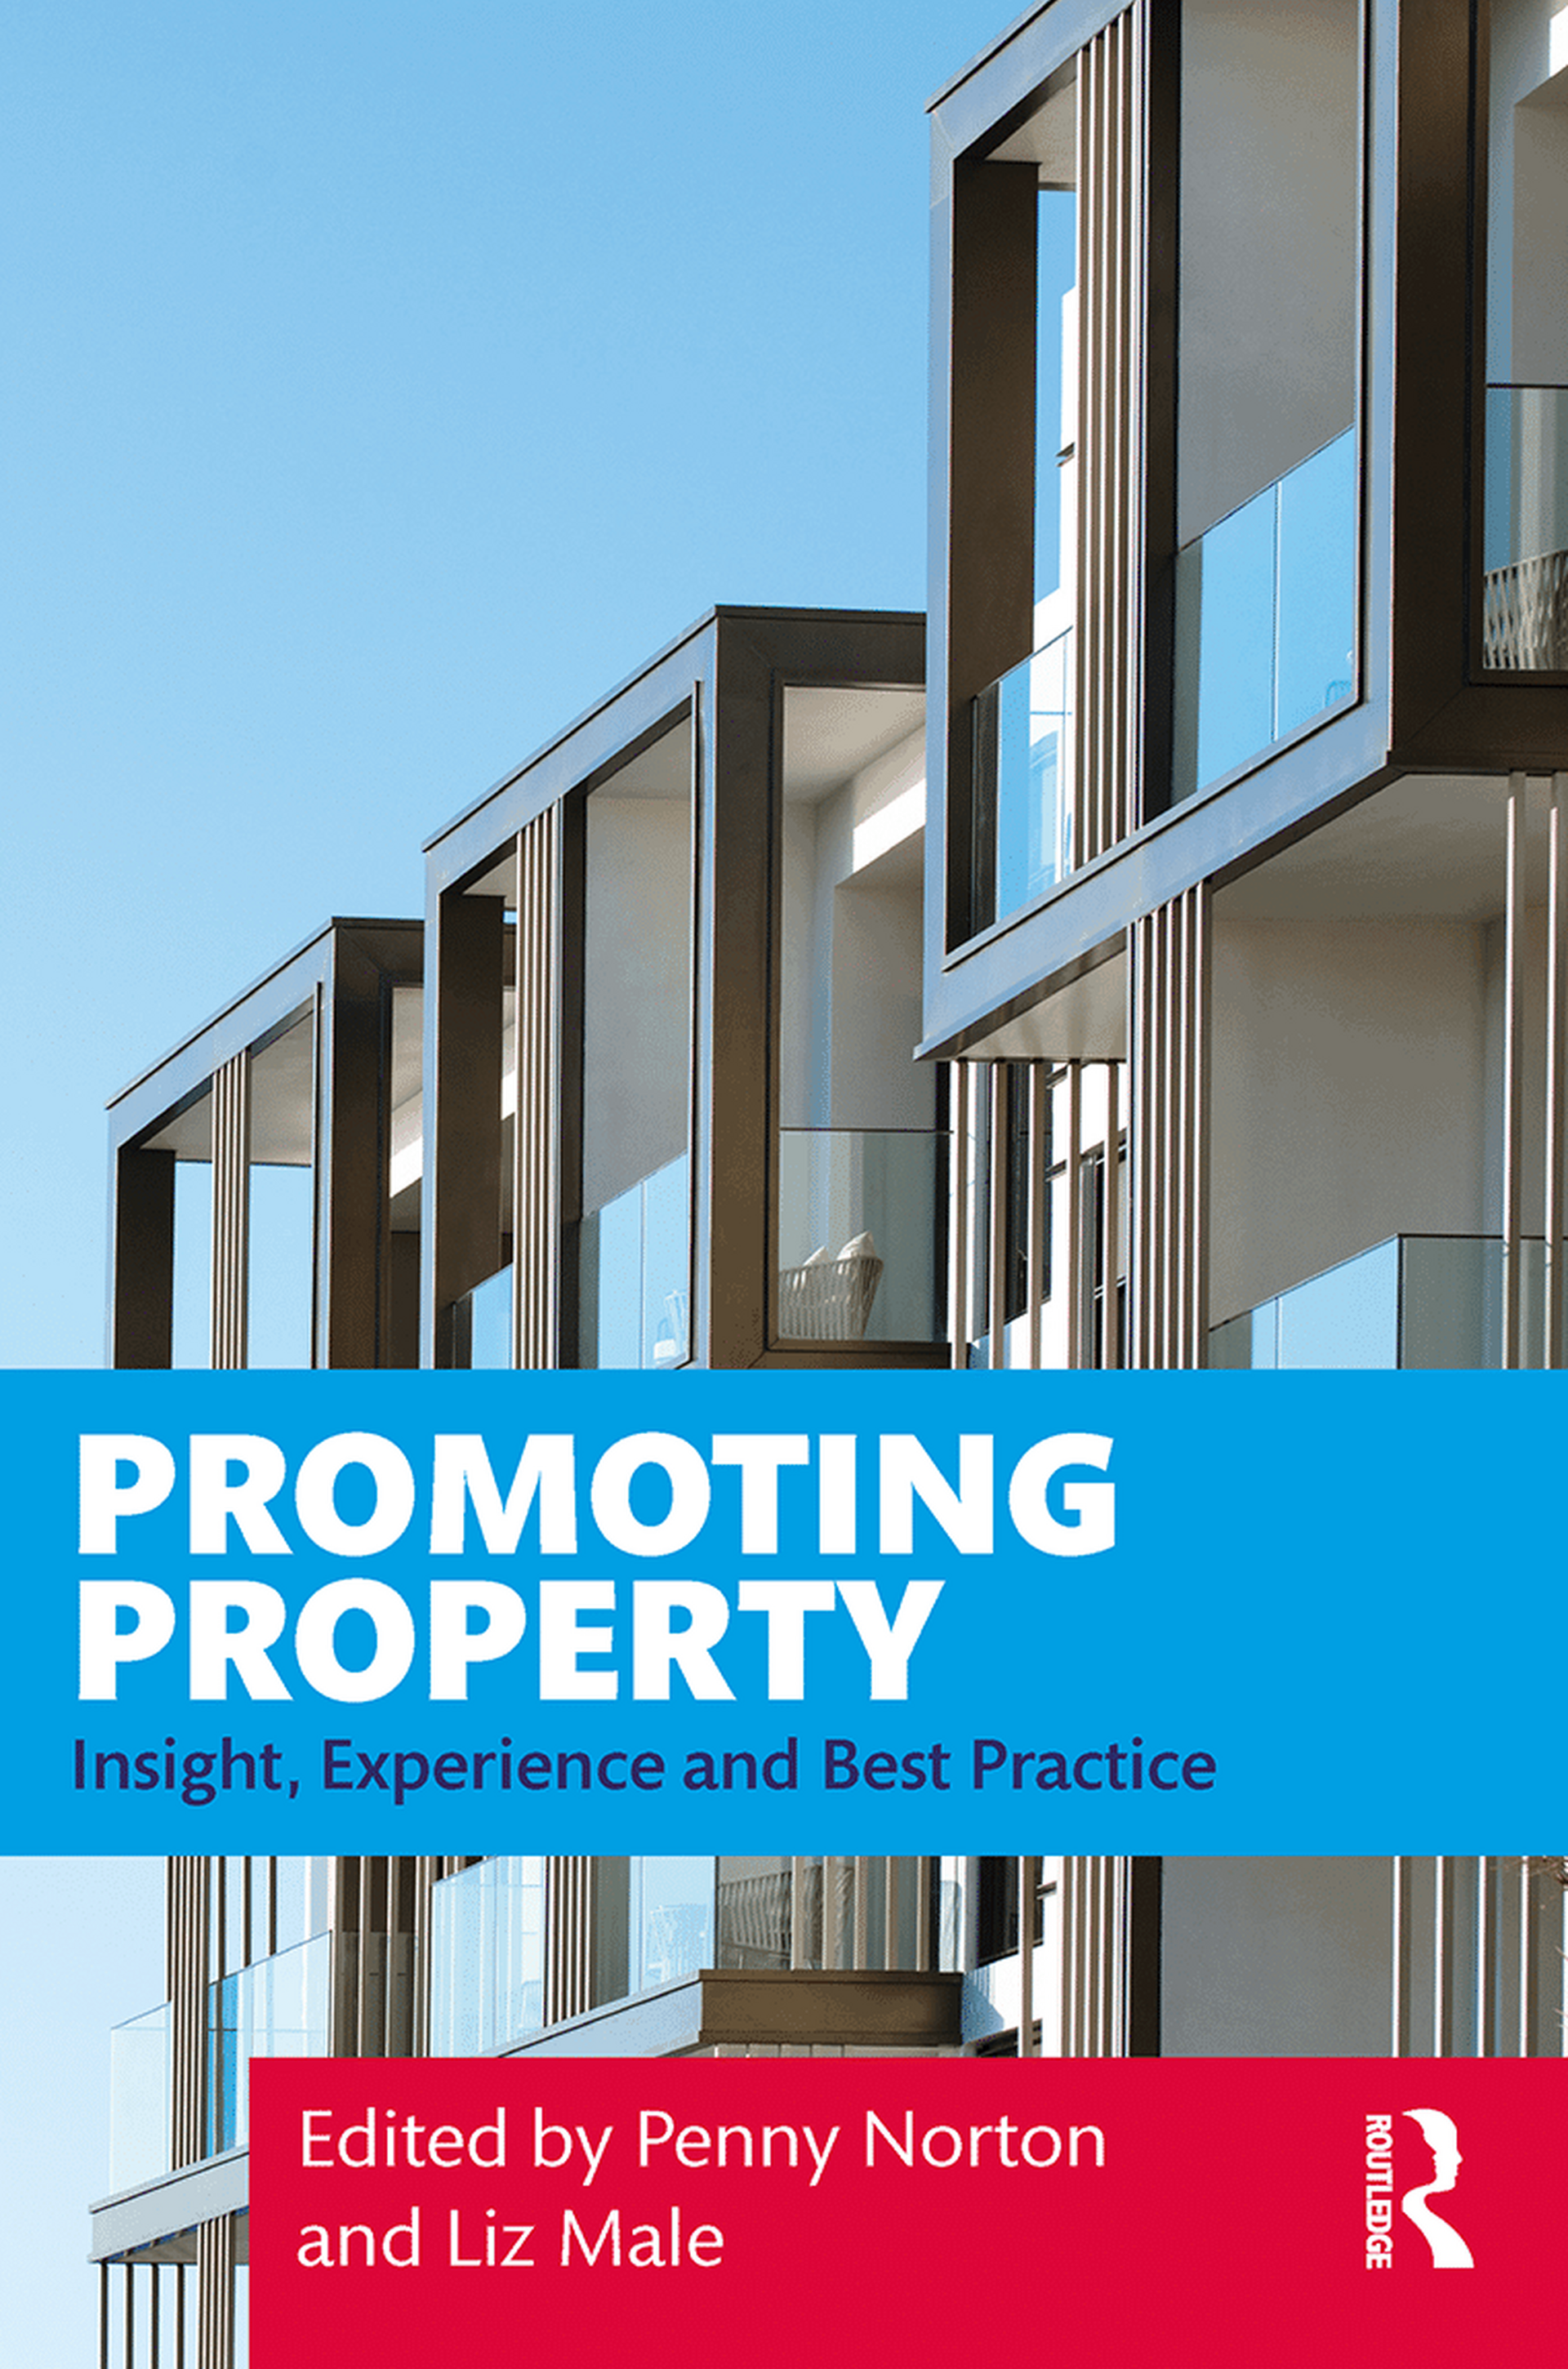 LMC Promoting Property book front cover